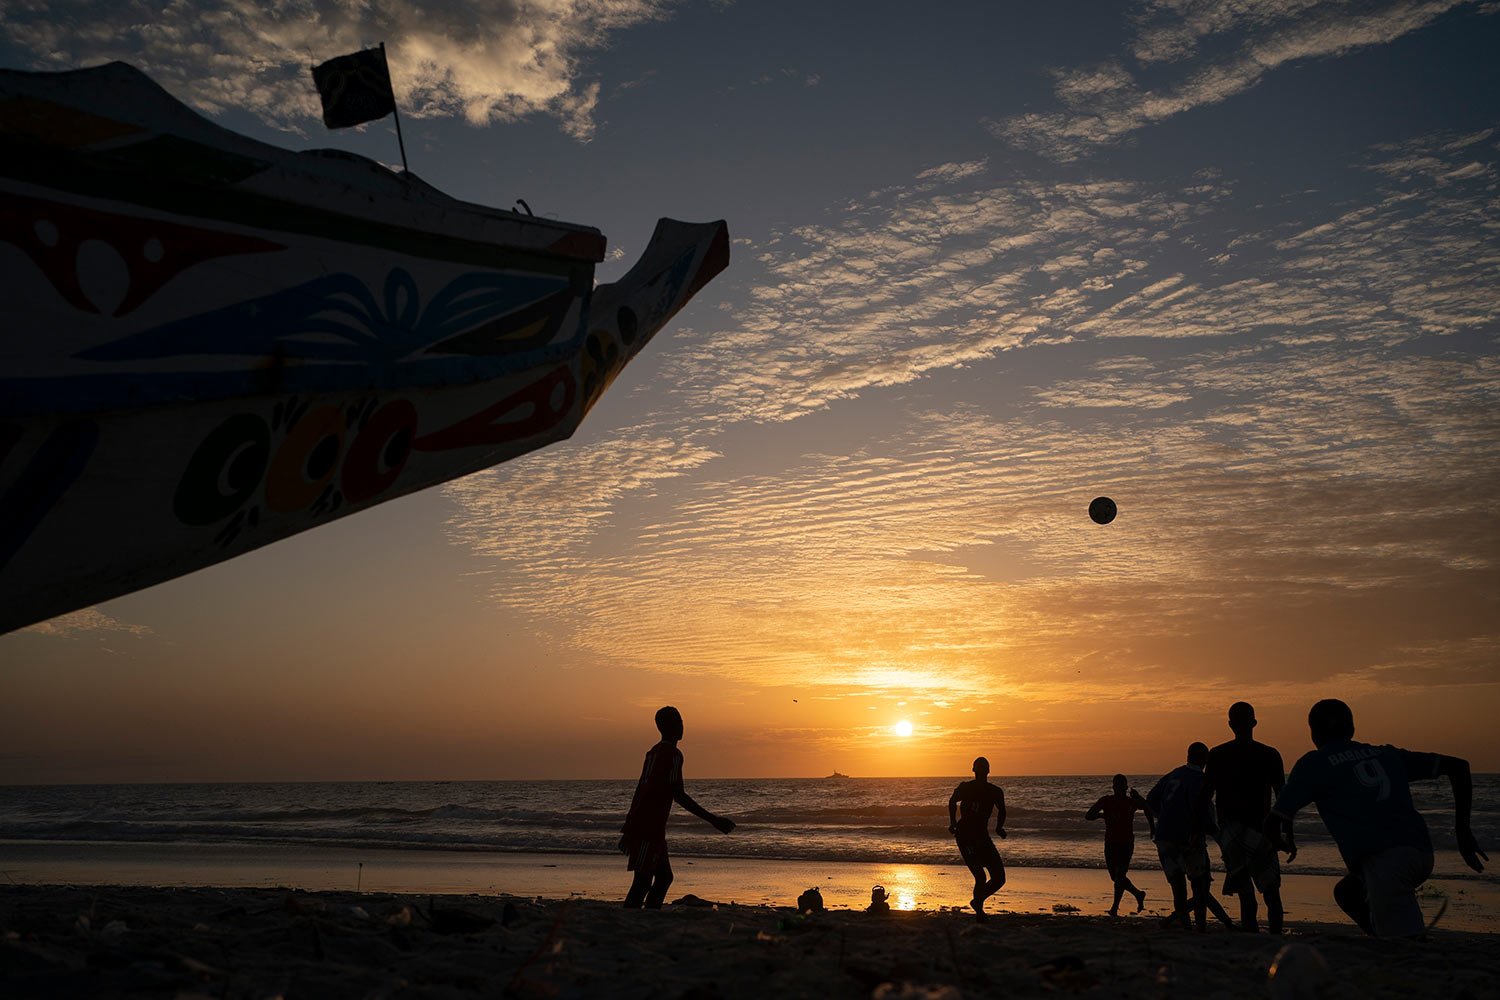  Silhouetted against the setting sun, youths play soccer next to a pirogue docked on the beach in Saint Louis, Senegal, Thursday, Jan. 19, 2023. (AP Photo/Leo Correa) 